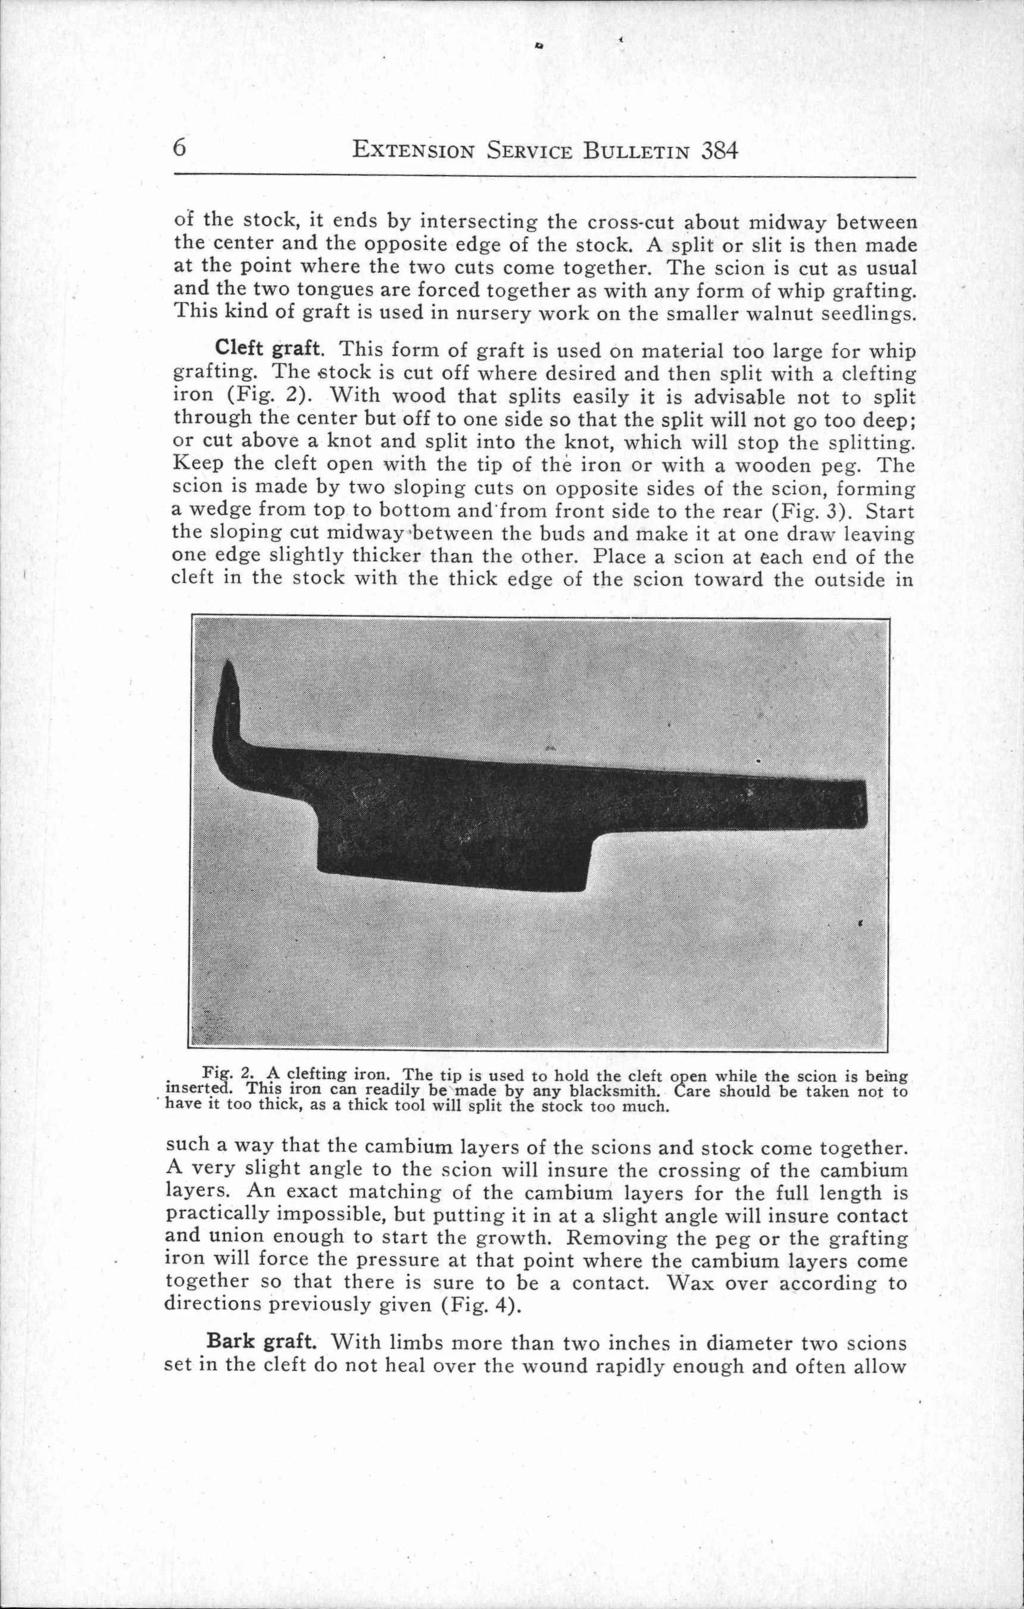 6 EXTENSION SERVICE BULLETIN 384 of the stock, it ends by intersecting the cross-cut about midway between the center and the opposite edge of the stock.